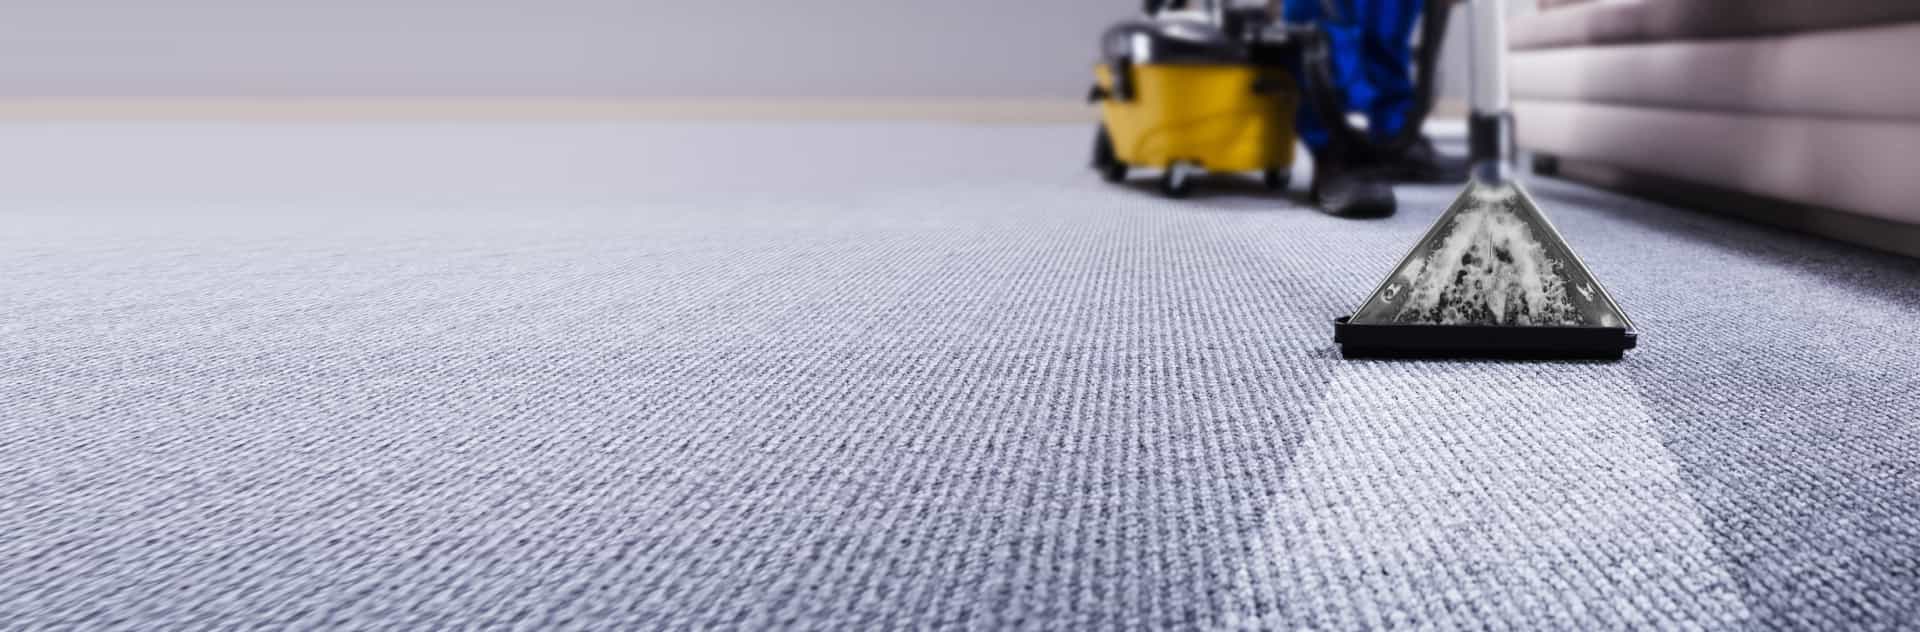 carpet cleaning plymouth ma